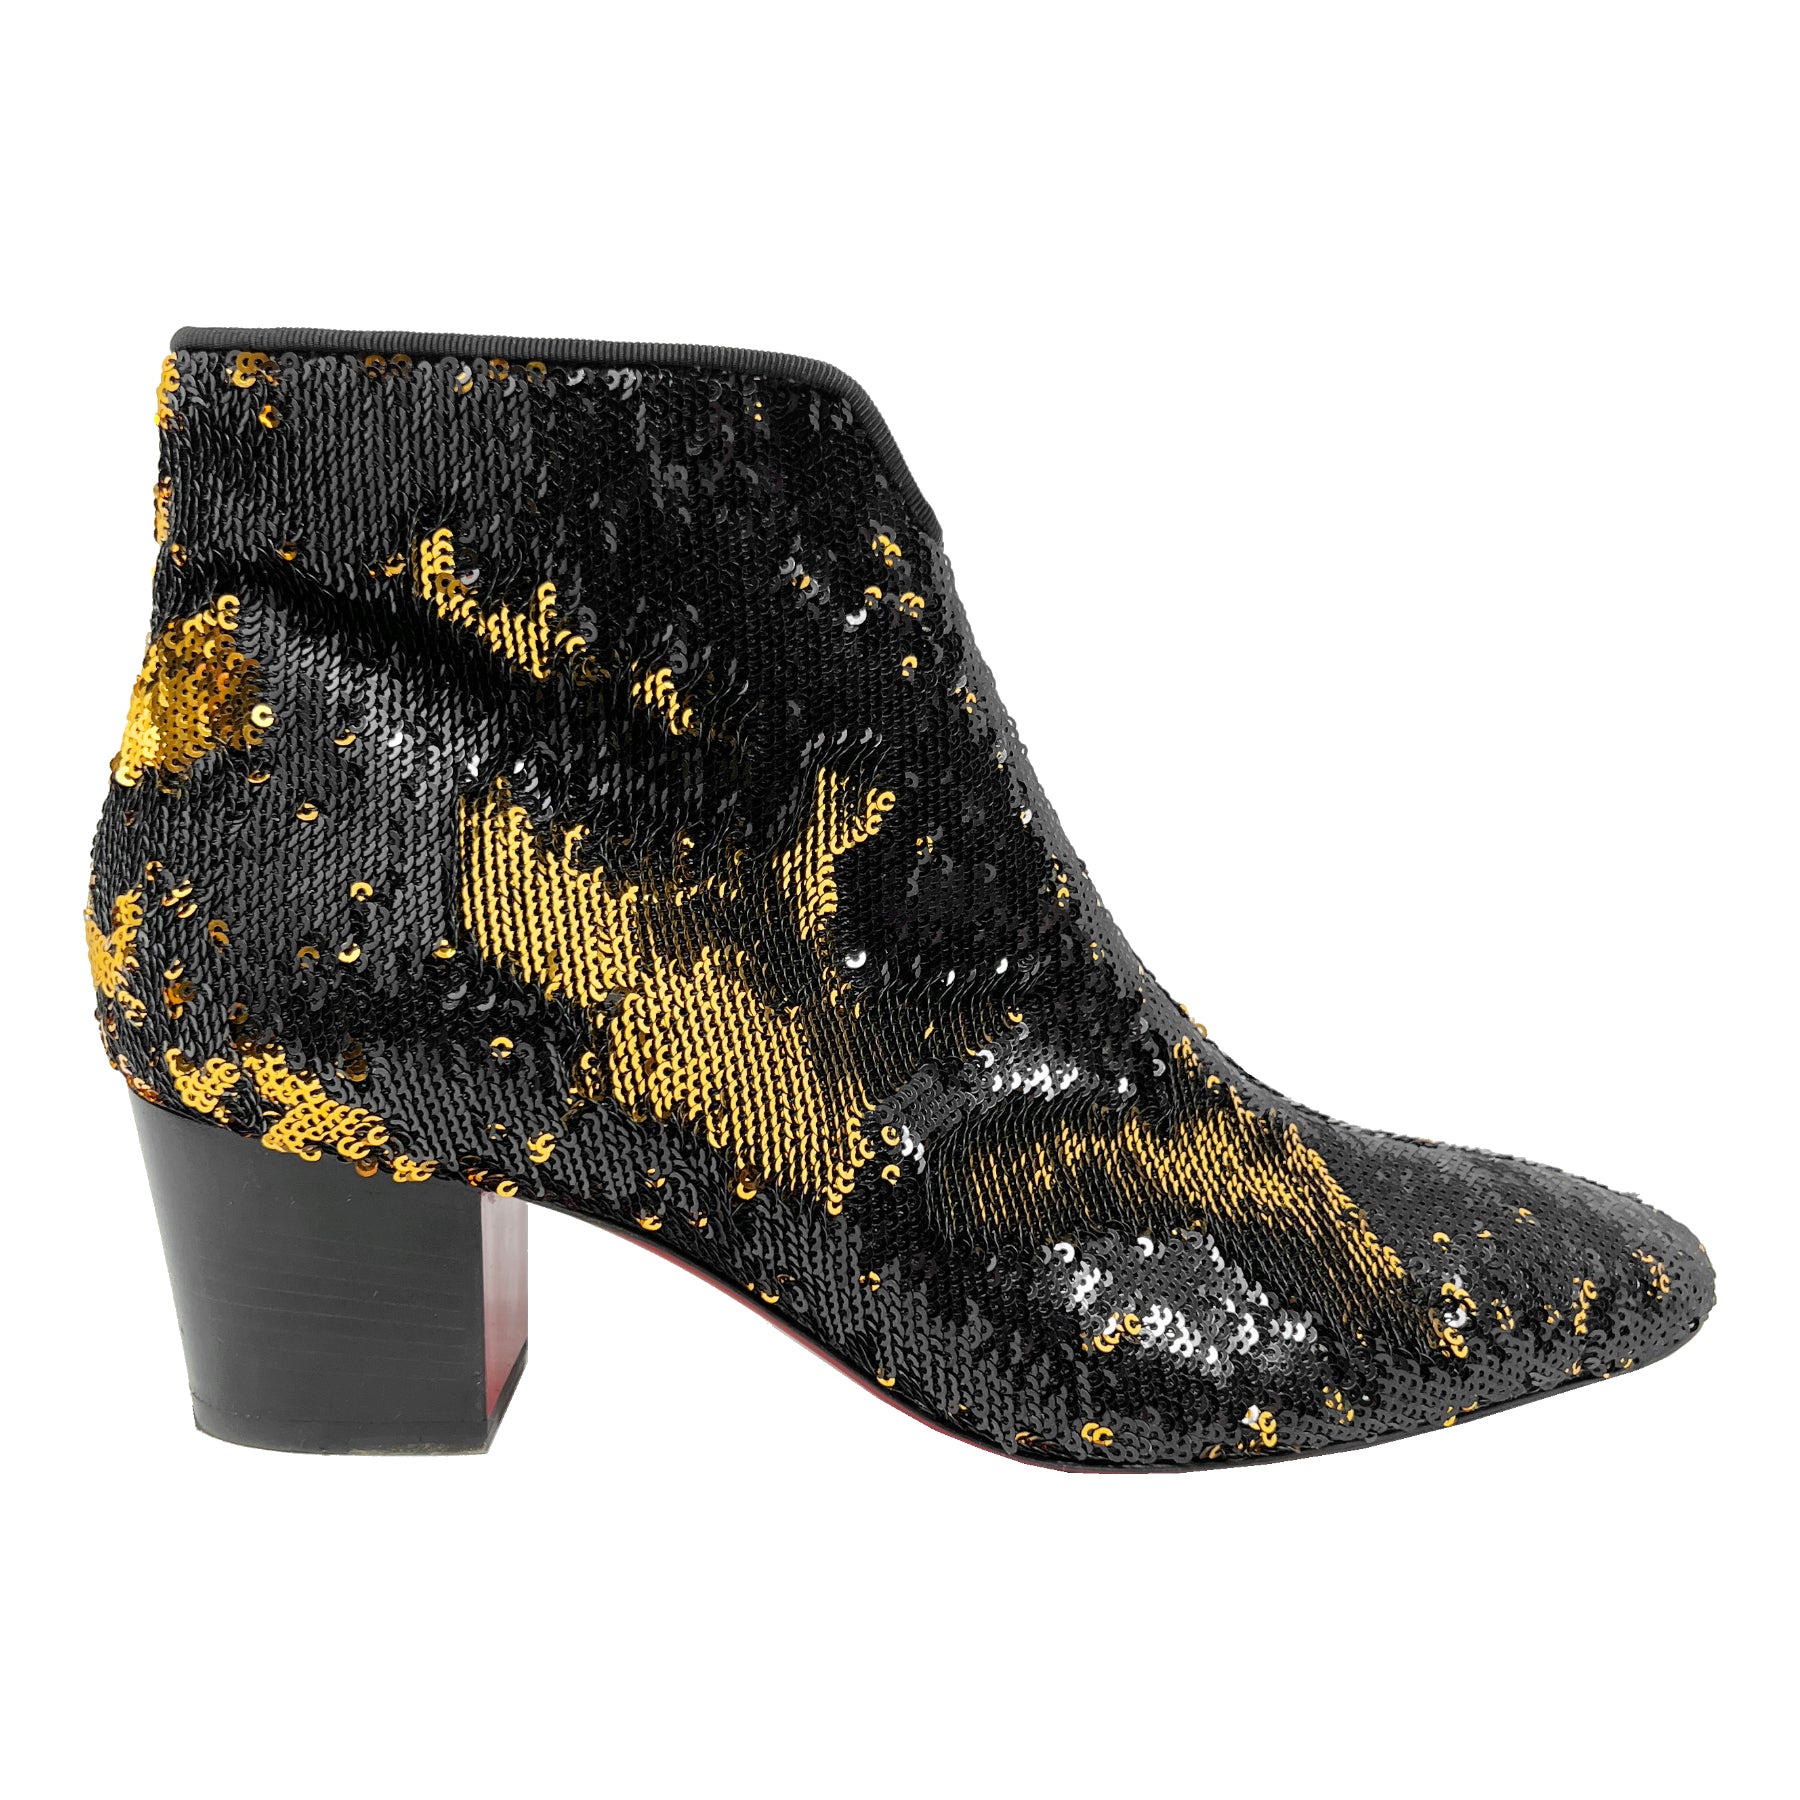 Christian Louboutin Disco Black Gold Sequins Paillettes Leather lined Block Heels Ankle Boots